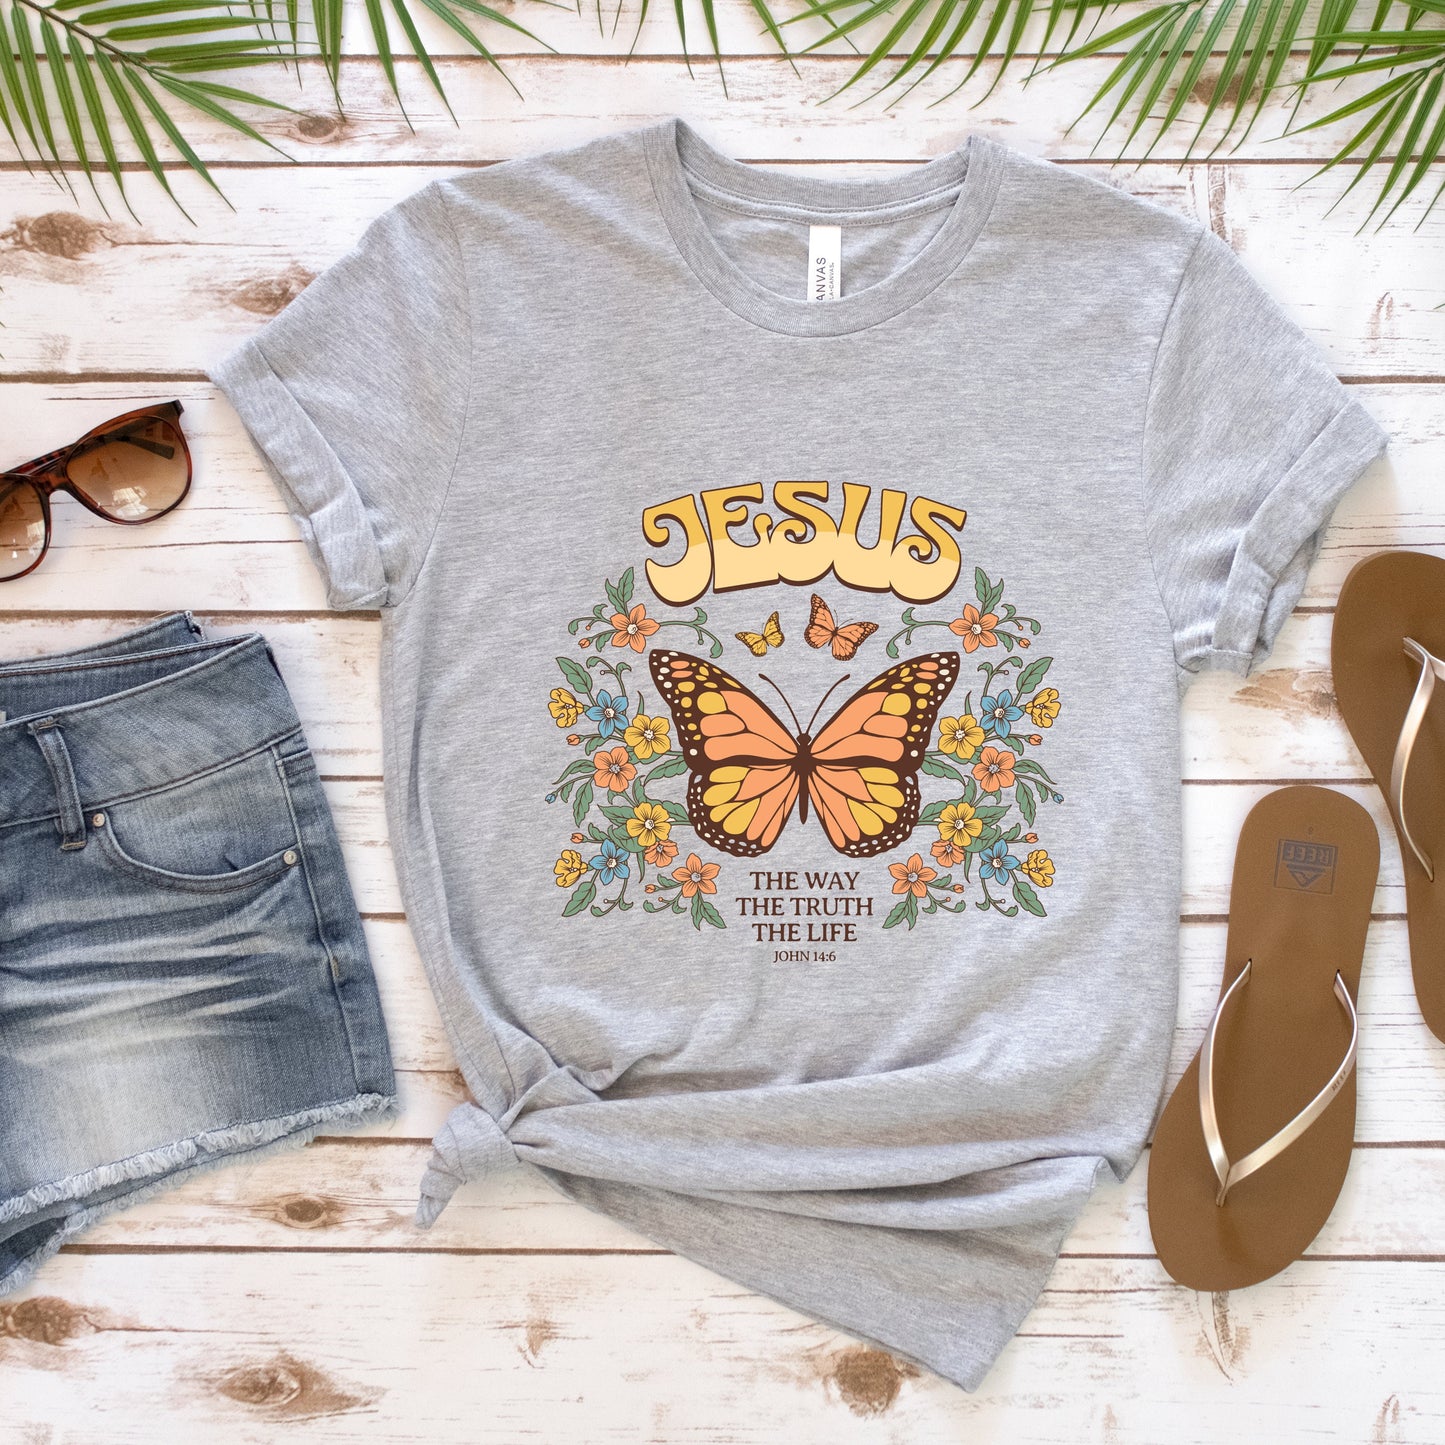 Boho Christian Shirts Christian TShirts Bible Verse Shirt Trendy Christians T Shirts Jesus Apparel Jesus is the way the truth and the life